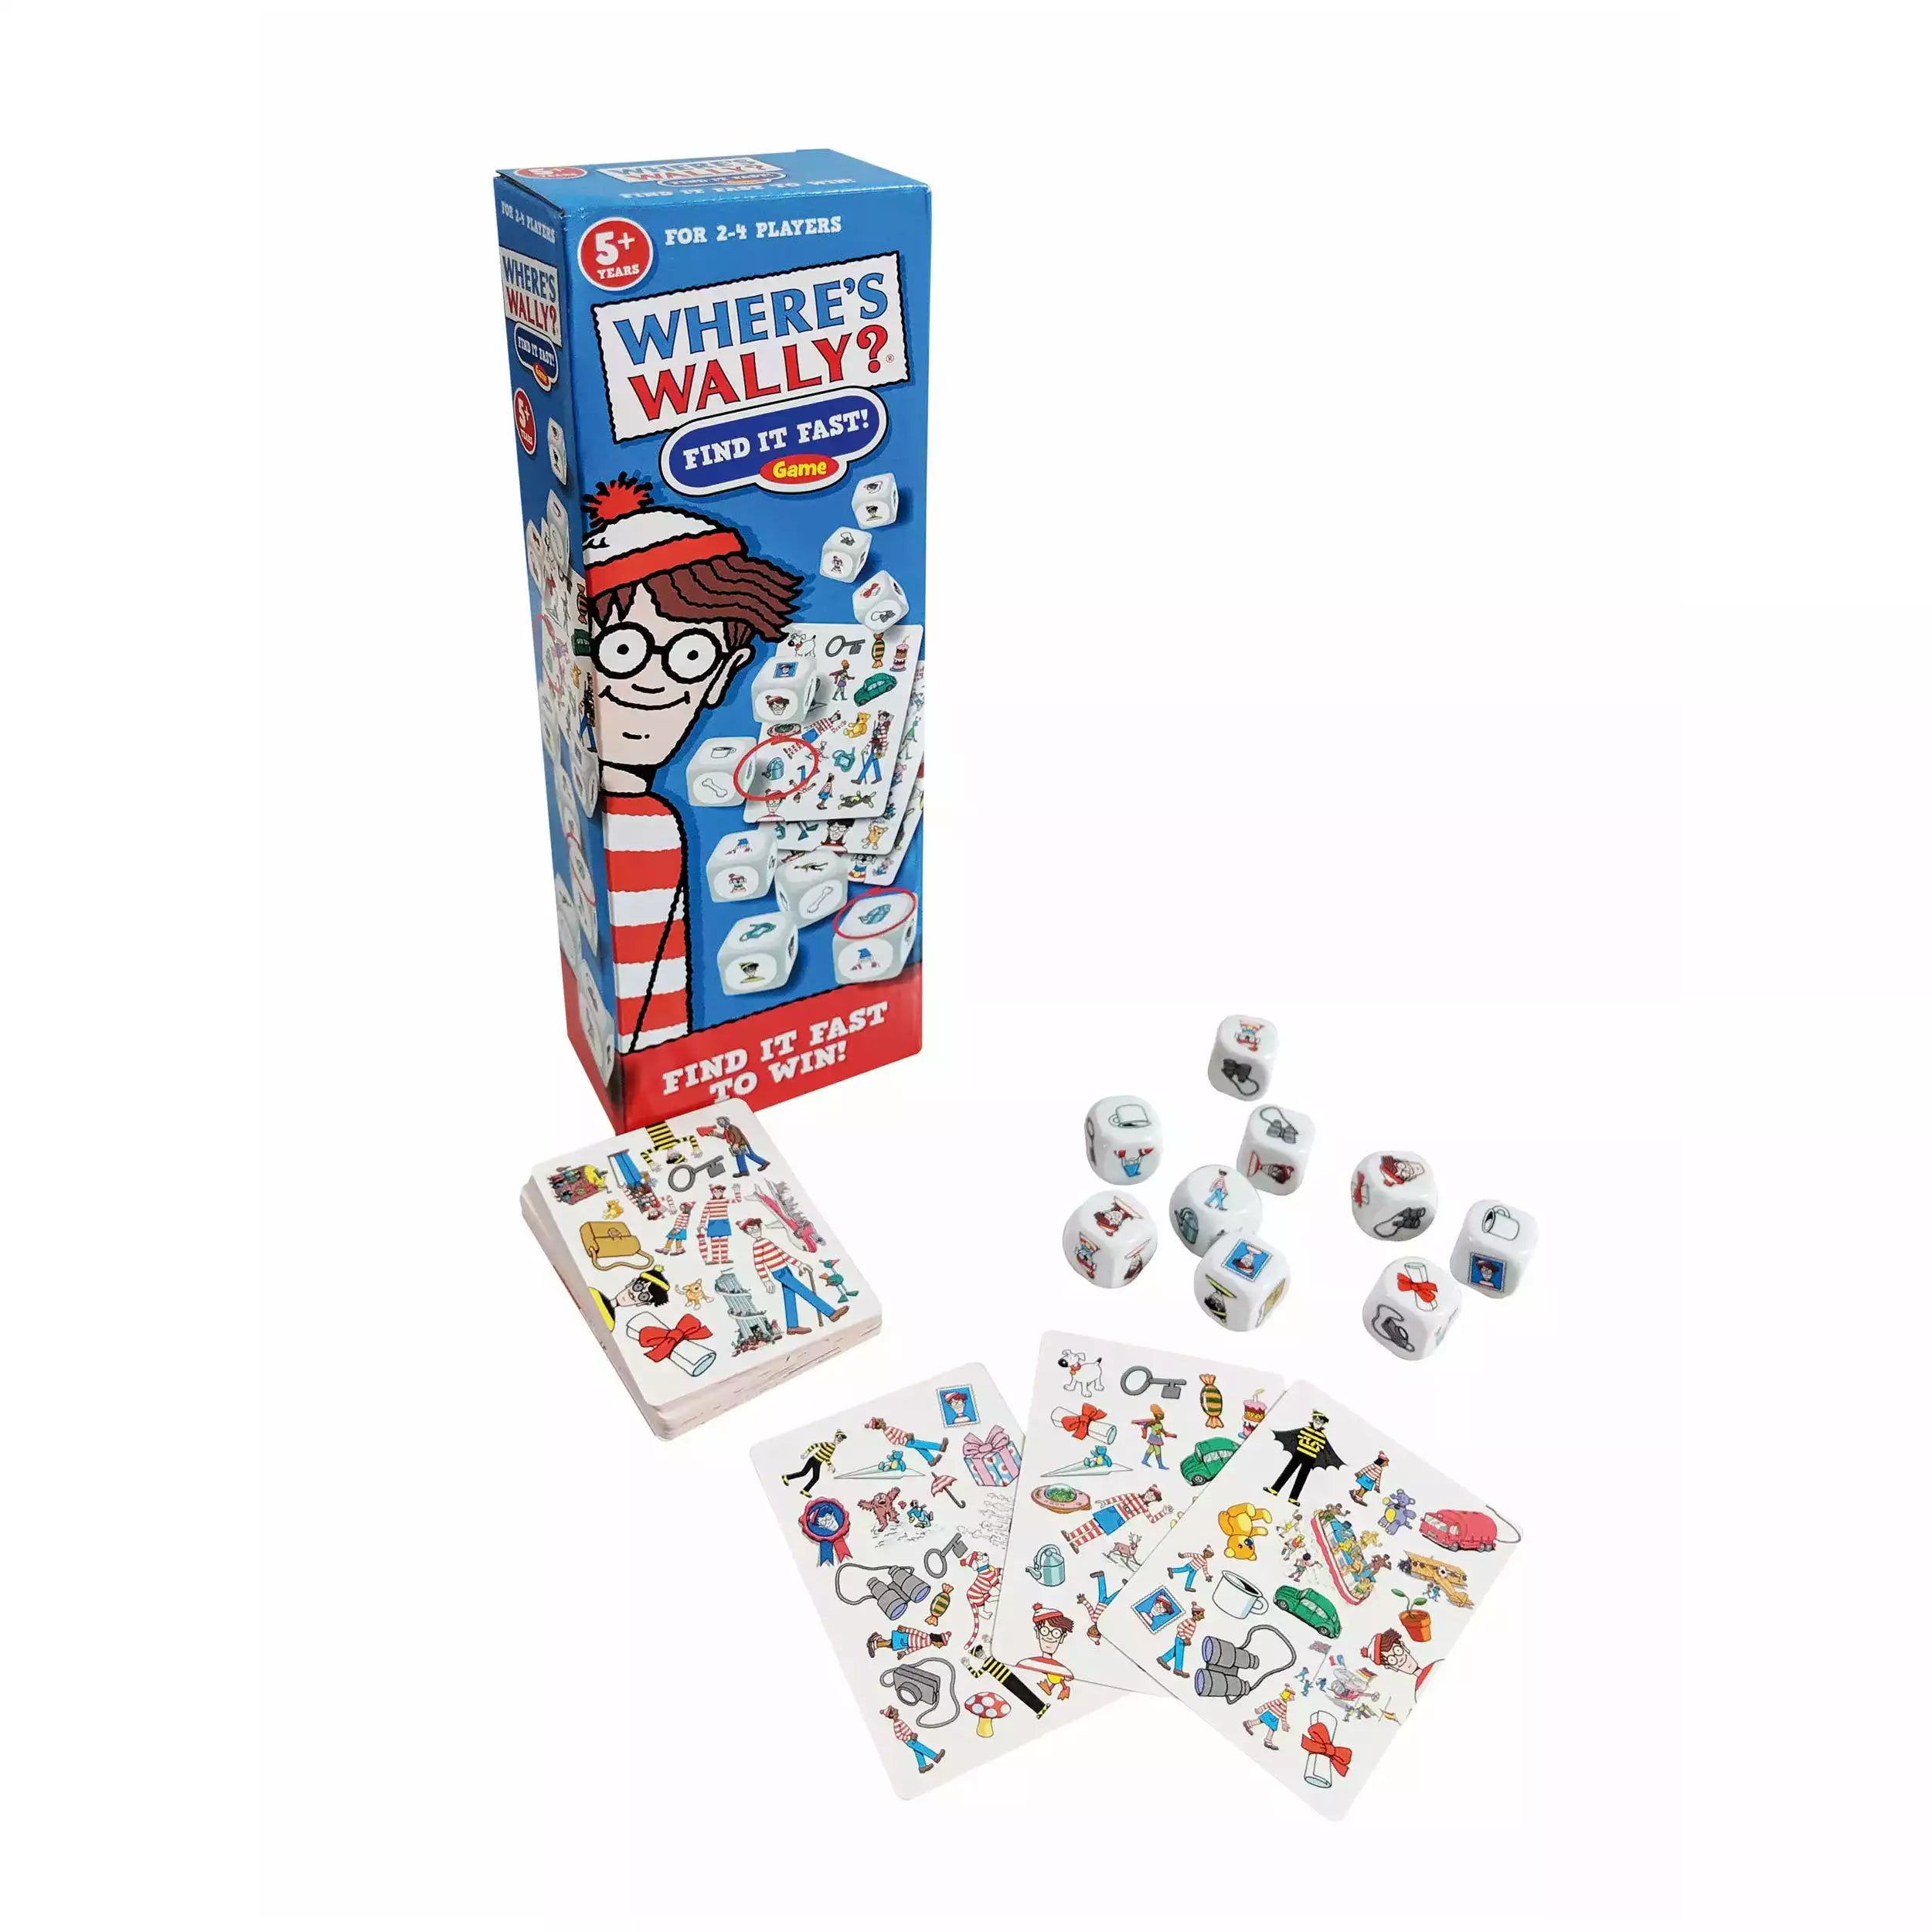 where's wally game - how to find where's wally toy - university games